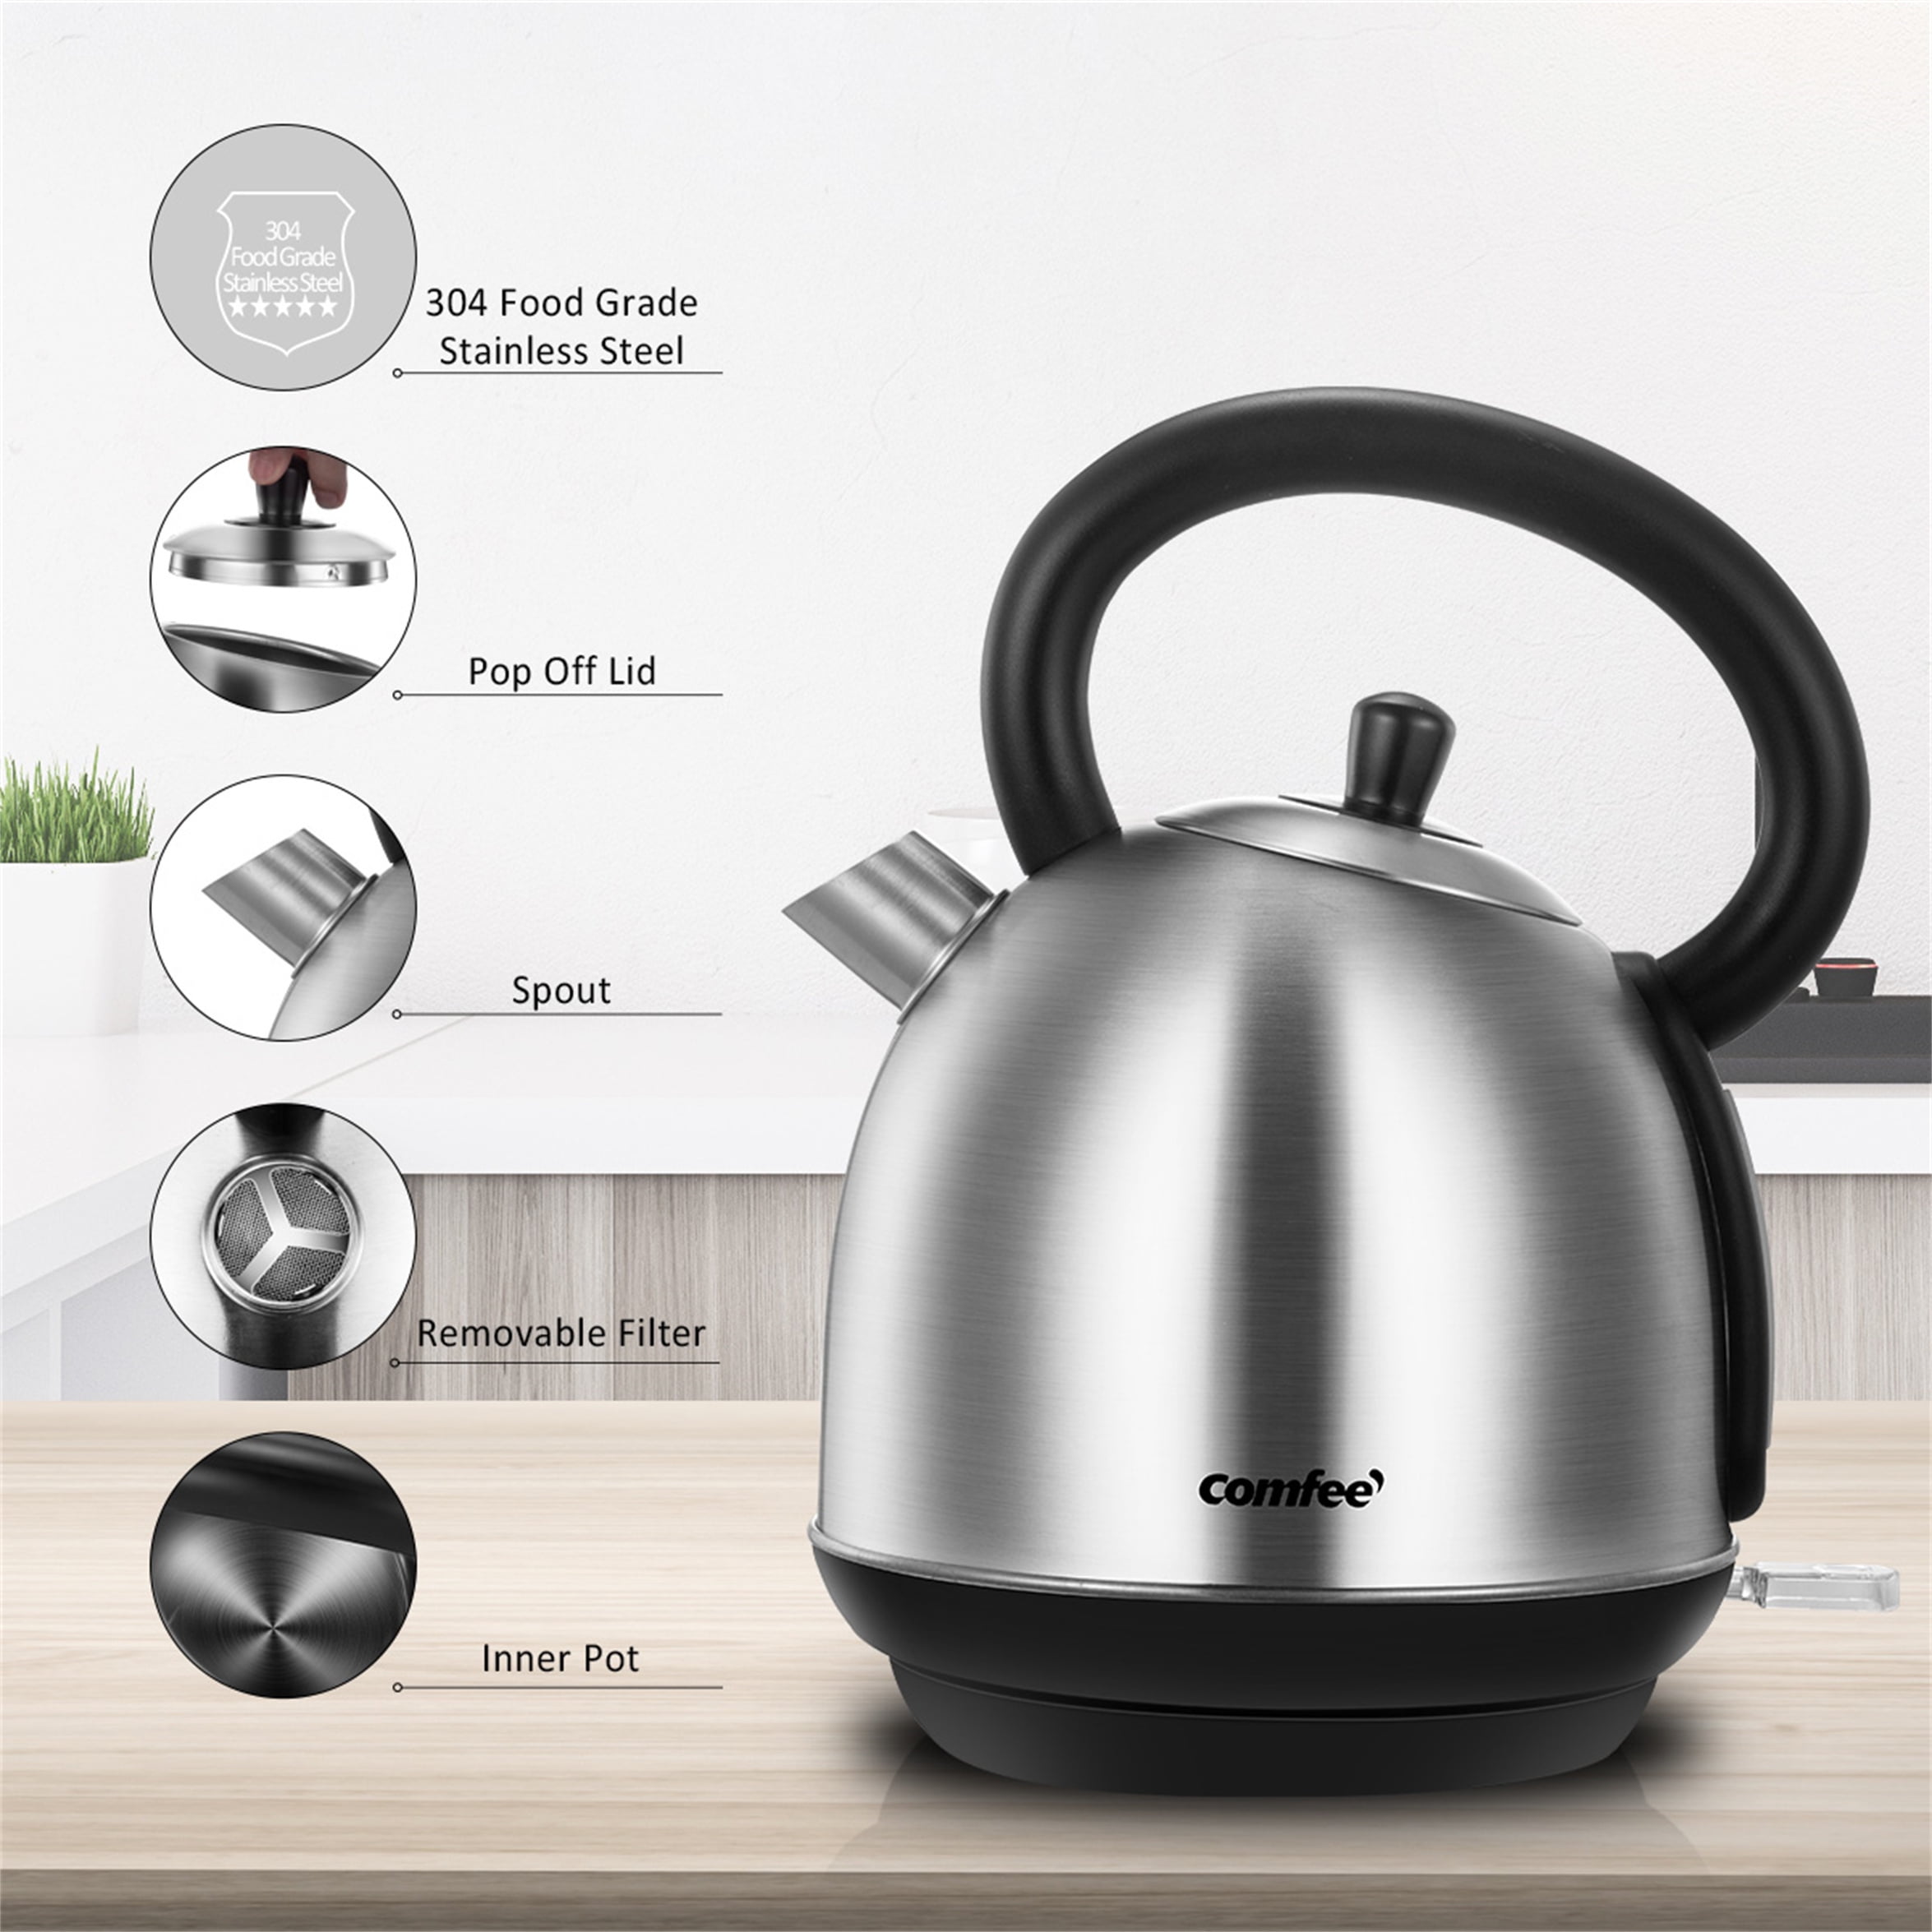  Electric Kettle, Glass Kettle With Stainless Steel Filter,  Inner Lid And Bottom, 1550W 1.7 L, Fast And Quiet Boil, Auto Shut-Off And  Boil-Dry Protection, Cordless: Home & Kitchen